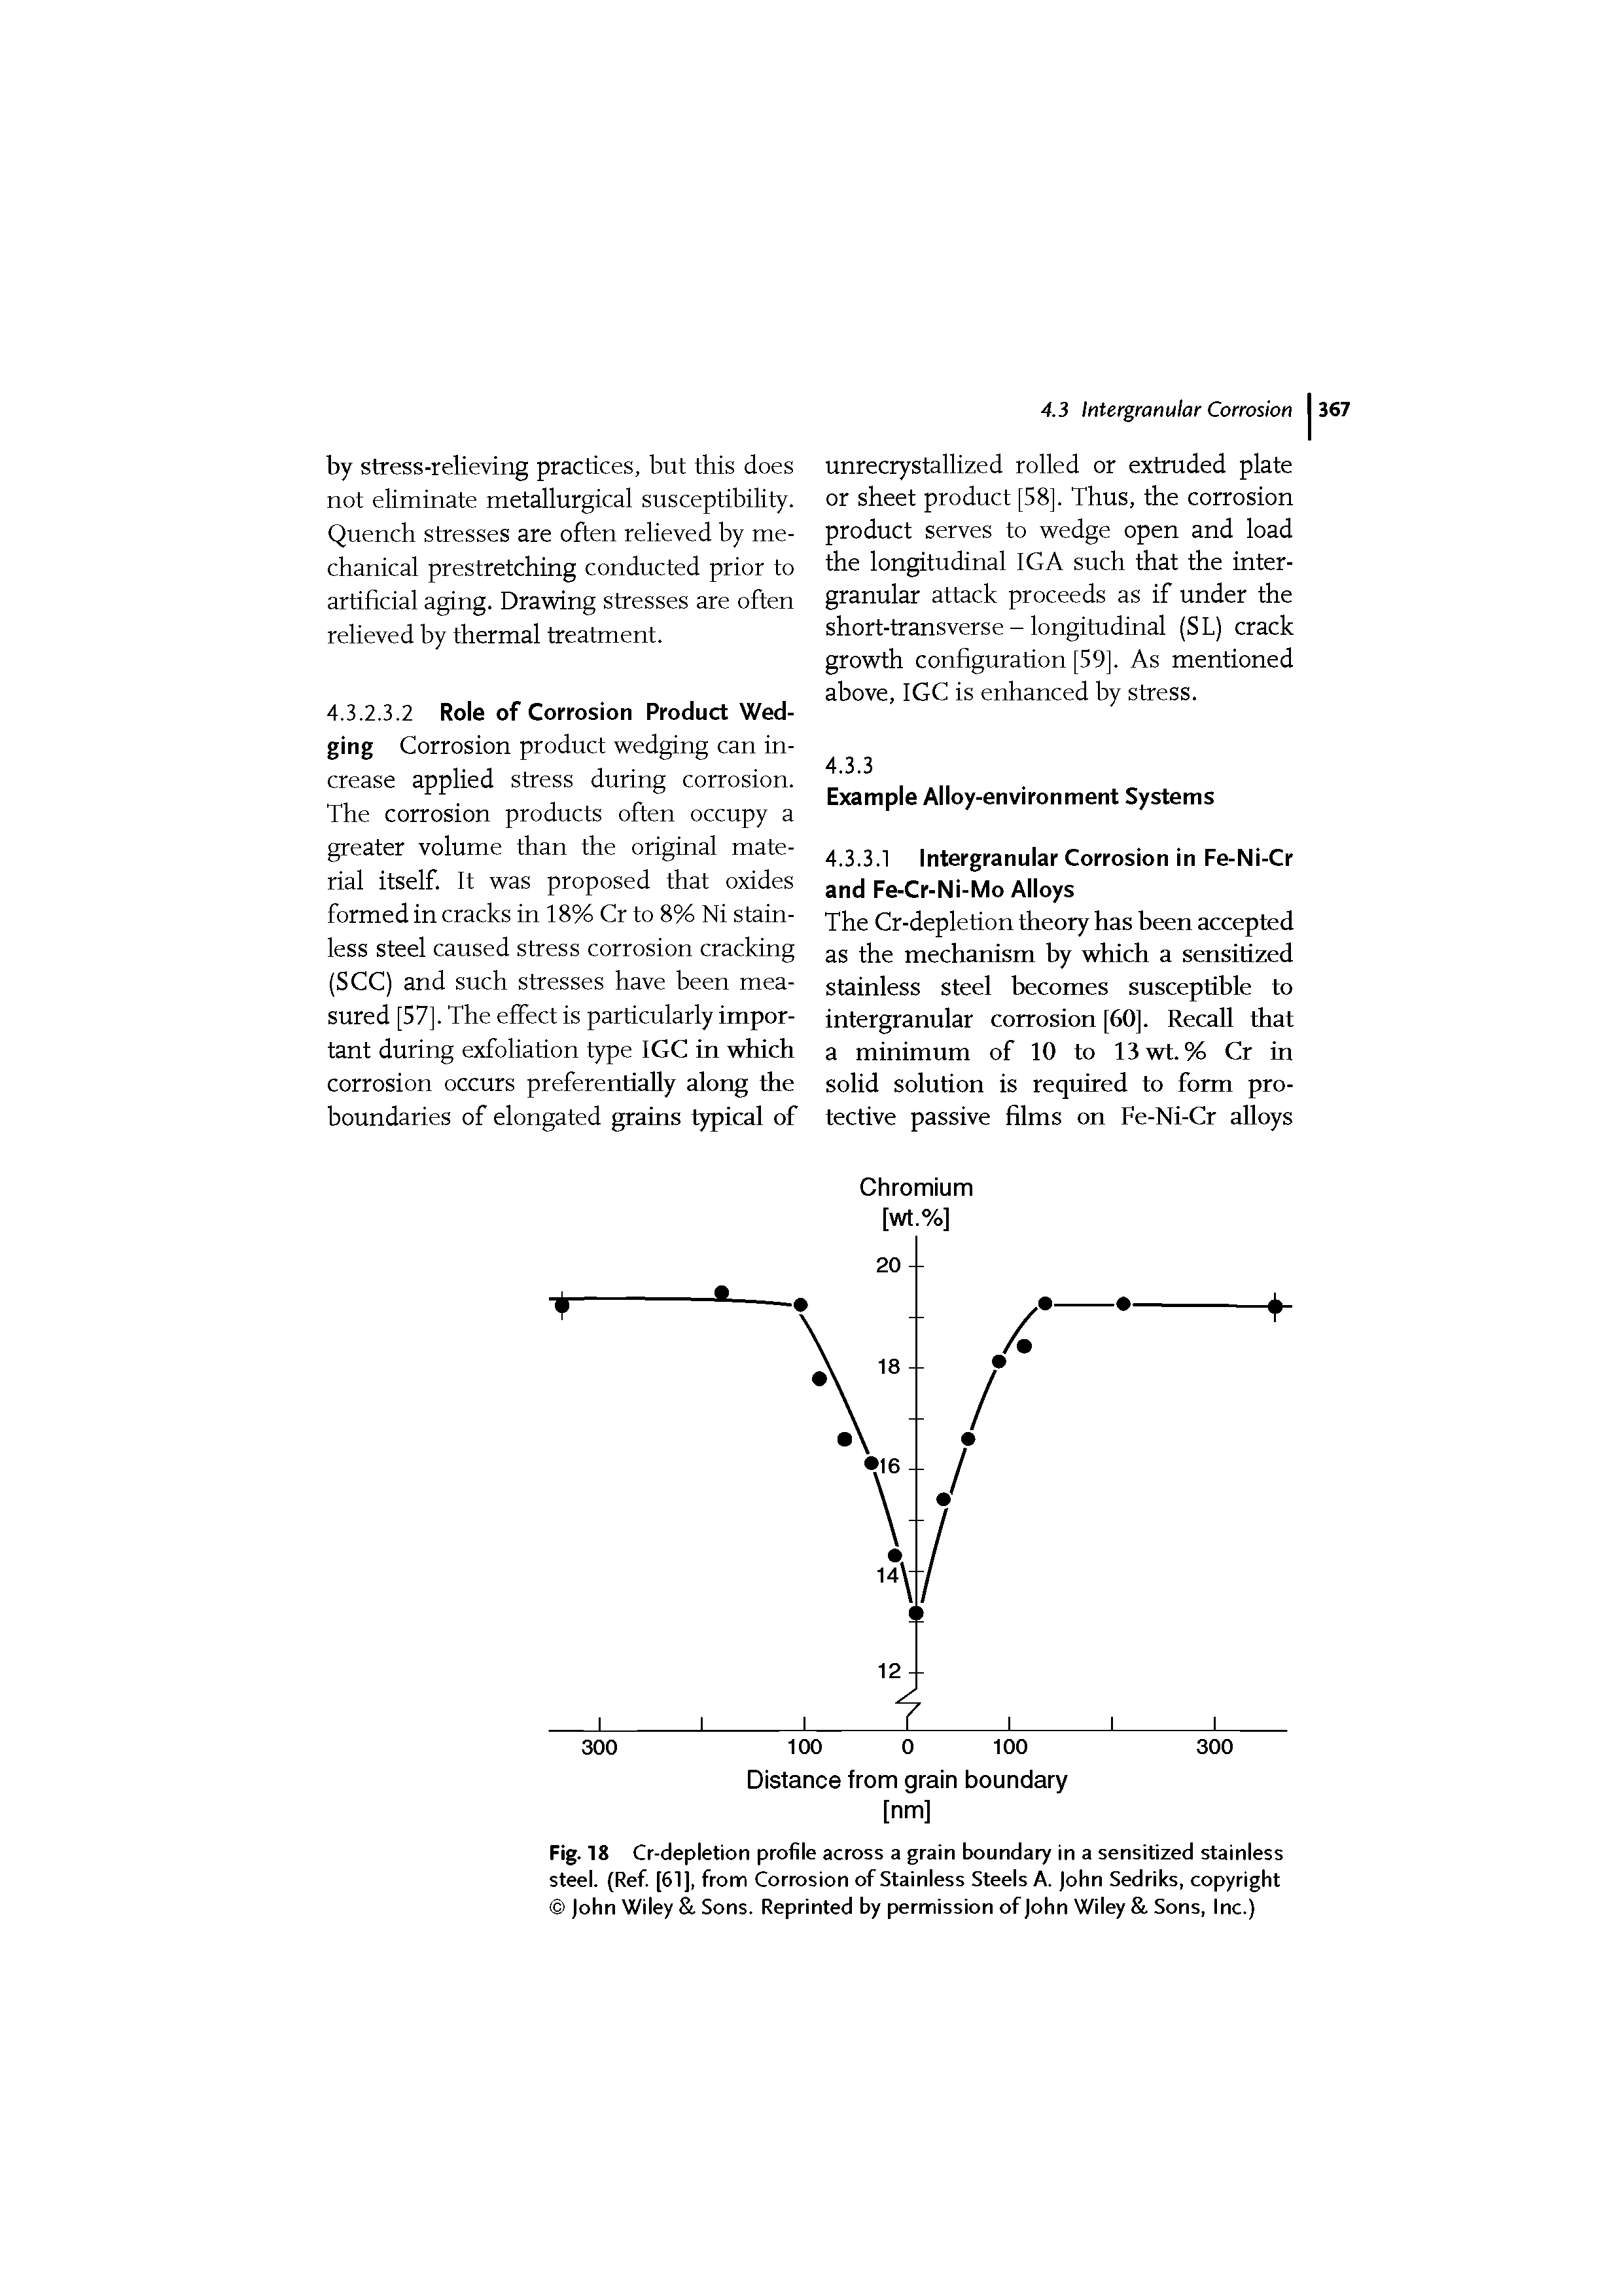 Fig. 18 Cr-depletion profile across a grain boundary in a sensitized stainless steel. (Ref [61], from Corrosion of Stainless Steels A. John Sedriks, copyright John Wiley. Sons. Reprinted by permission of John Wiley Sons, Inc.)...